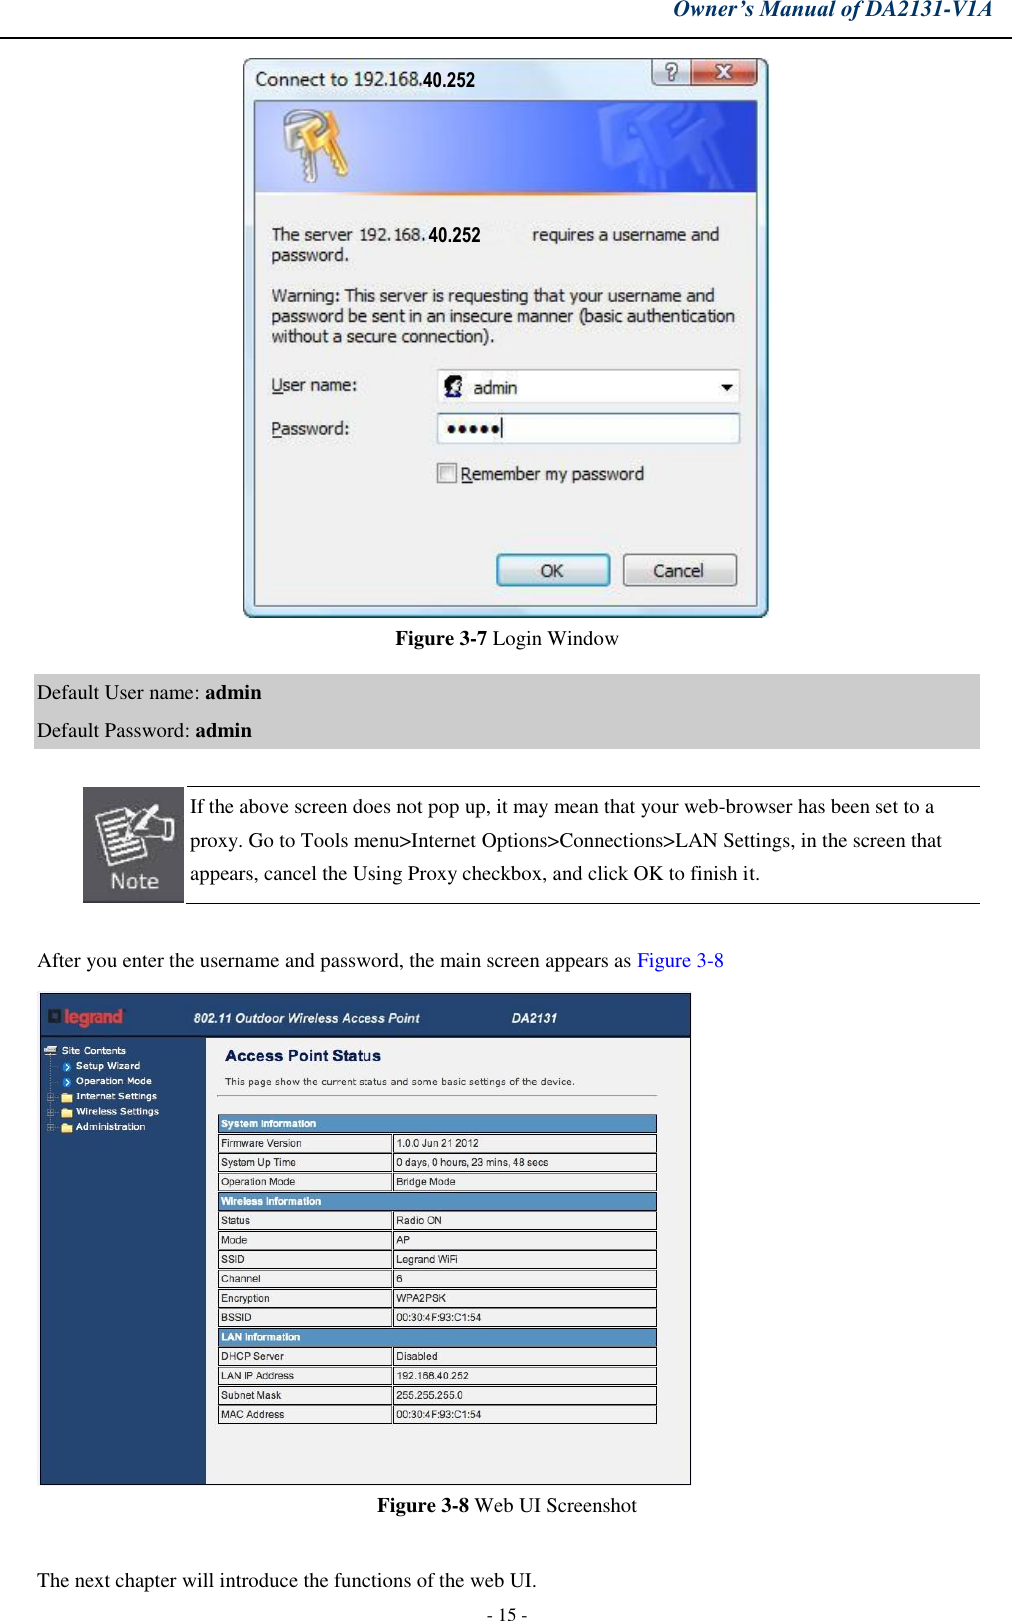 Owner’s Manual of DA2131-V1A - 15 - Figure 3-7 Login Window Default User name: admin Default Password: admin If the above screen does not pop up, it may mean that your web-browser has been set to a proxy. Go to Tools menu&gt;Internet Options&gt;Connections&gt;LAN Settings, in the screen that appears, cancel the Using Proxy checkbox, and click OK to finish it. After you enter the username and password, the main screen appears as Figure 3-8 Figure 3-8 Web UI Screenshot The next chapter will introduce the functions of the web UI.40.252 40.252 